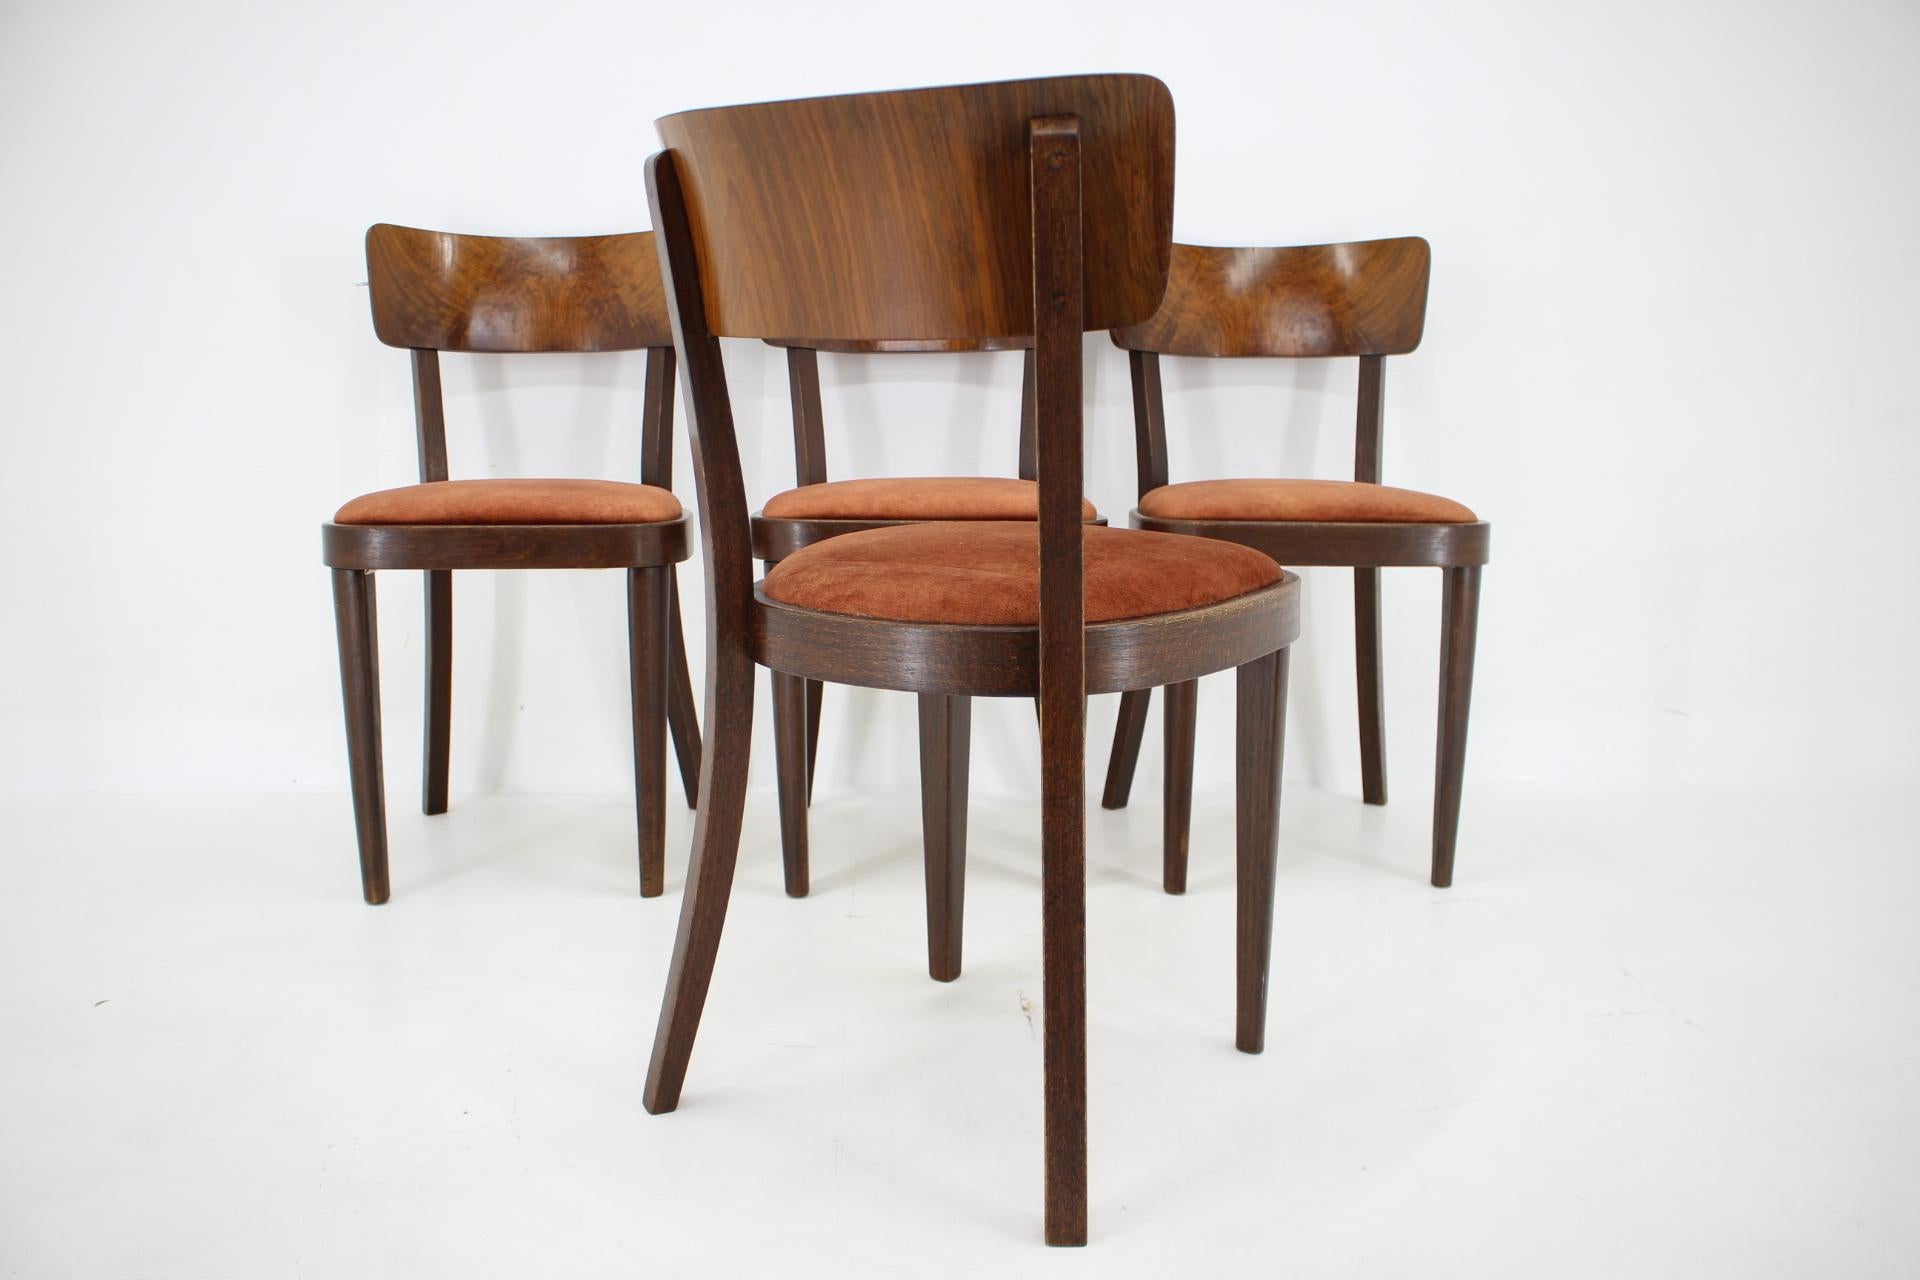 1940s Set of Four Dining Chairs, Czechoslovakia For Sale 2